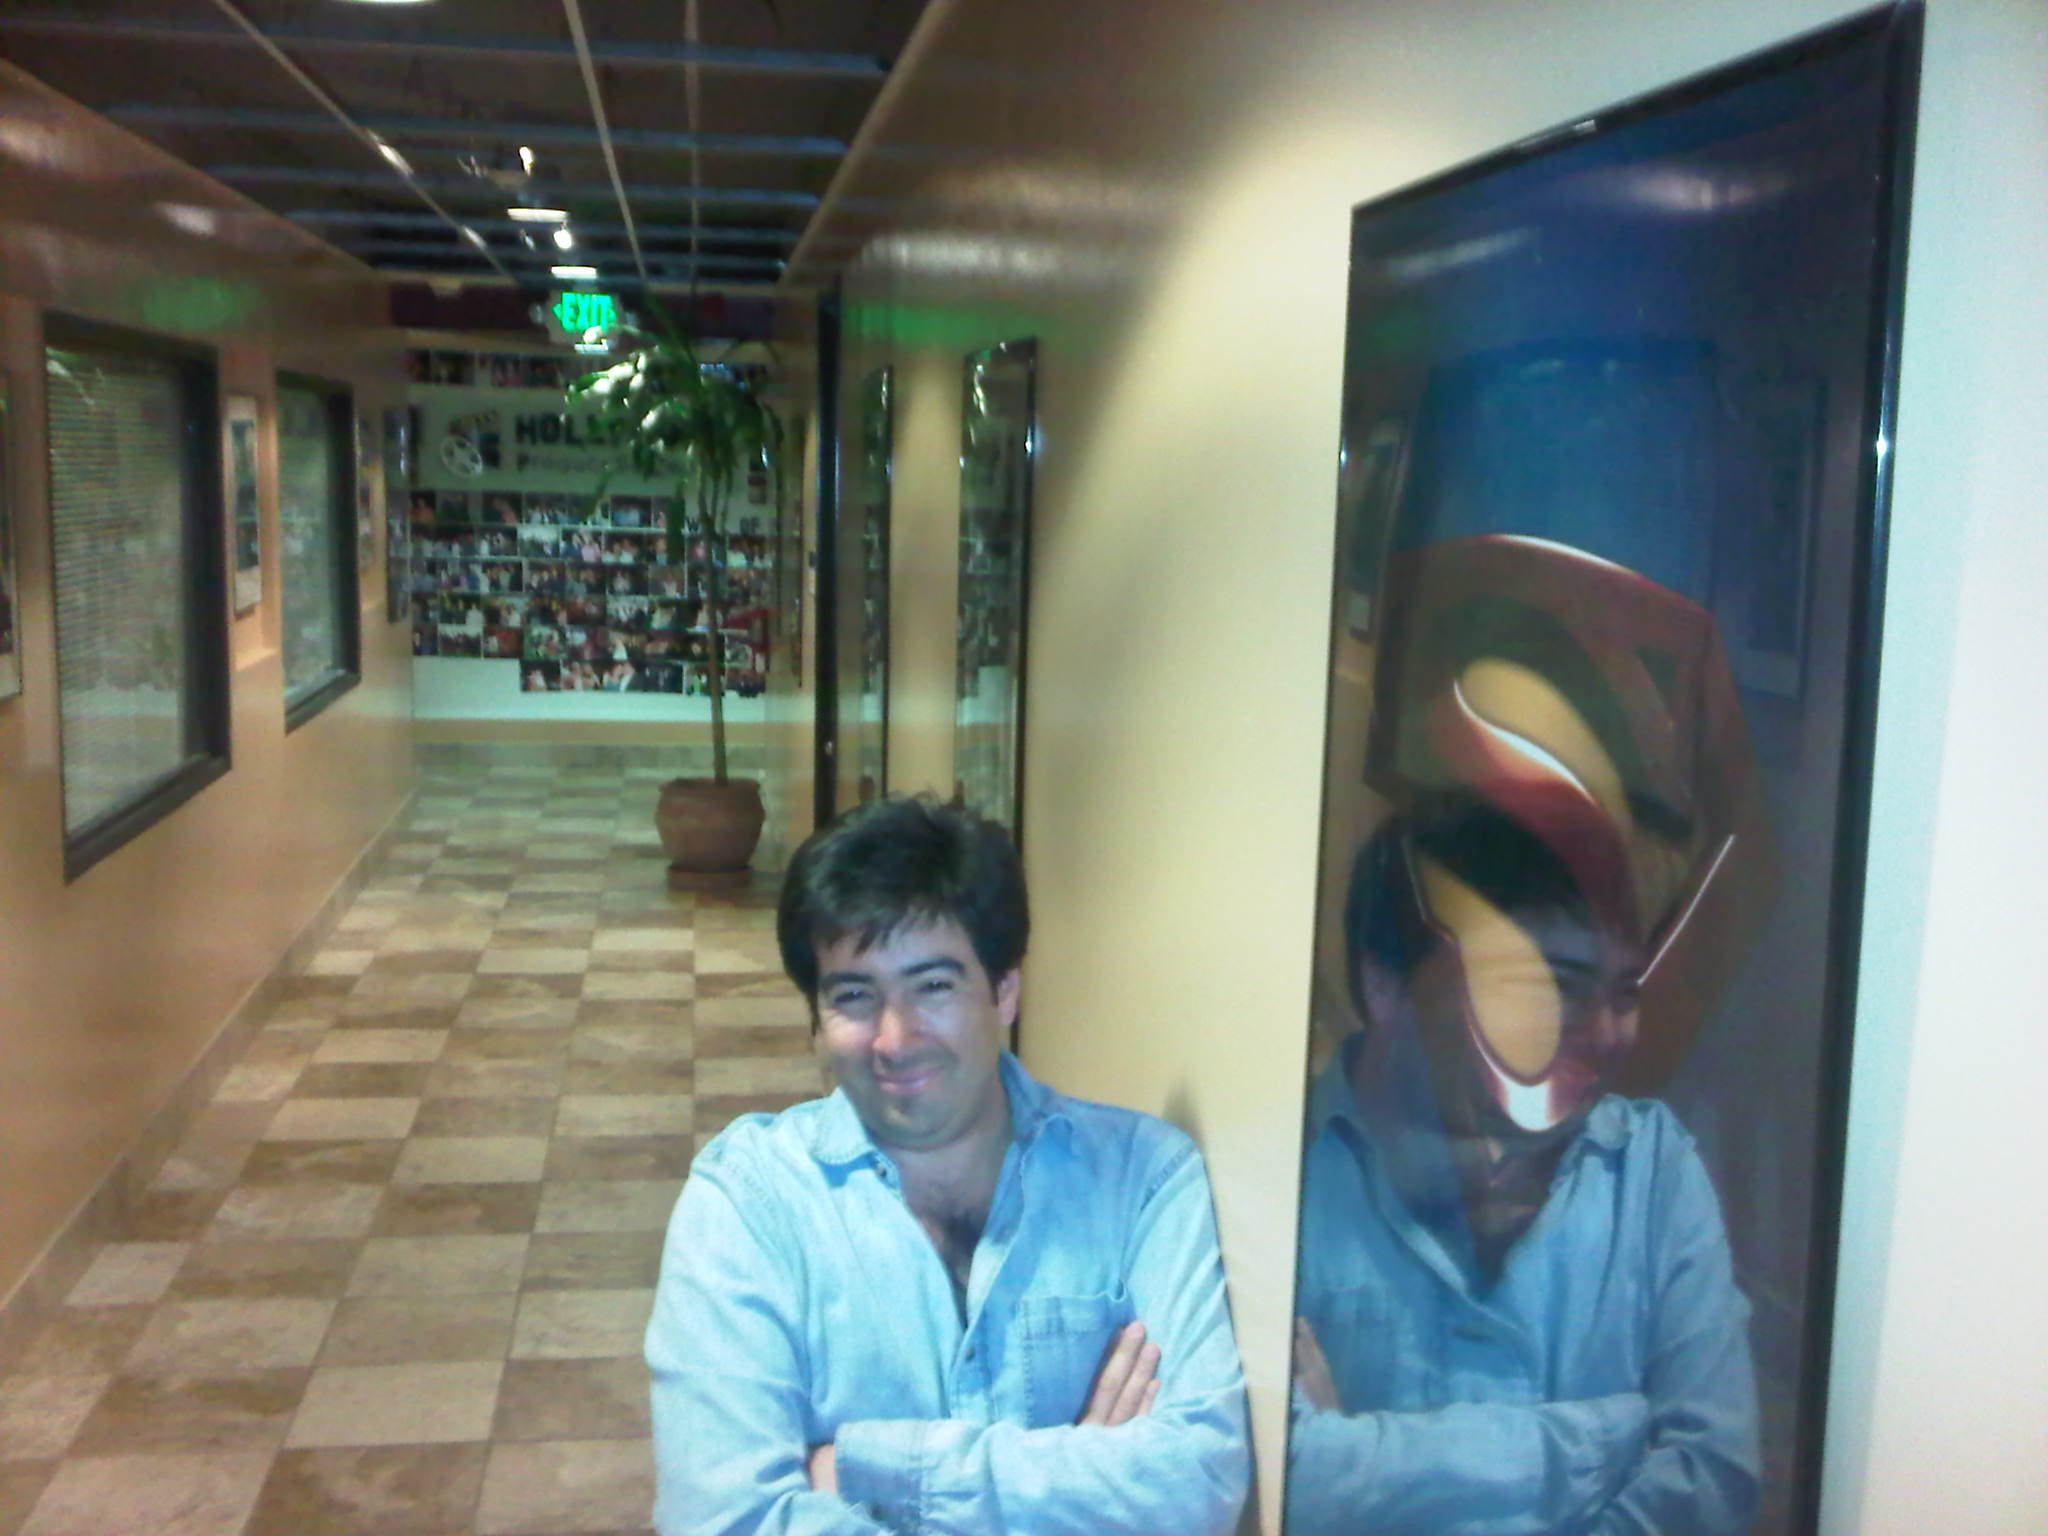 Pedro Araneda just outside his office in the Hollywood Production Center.